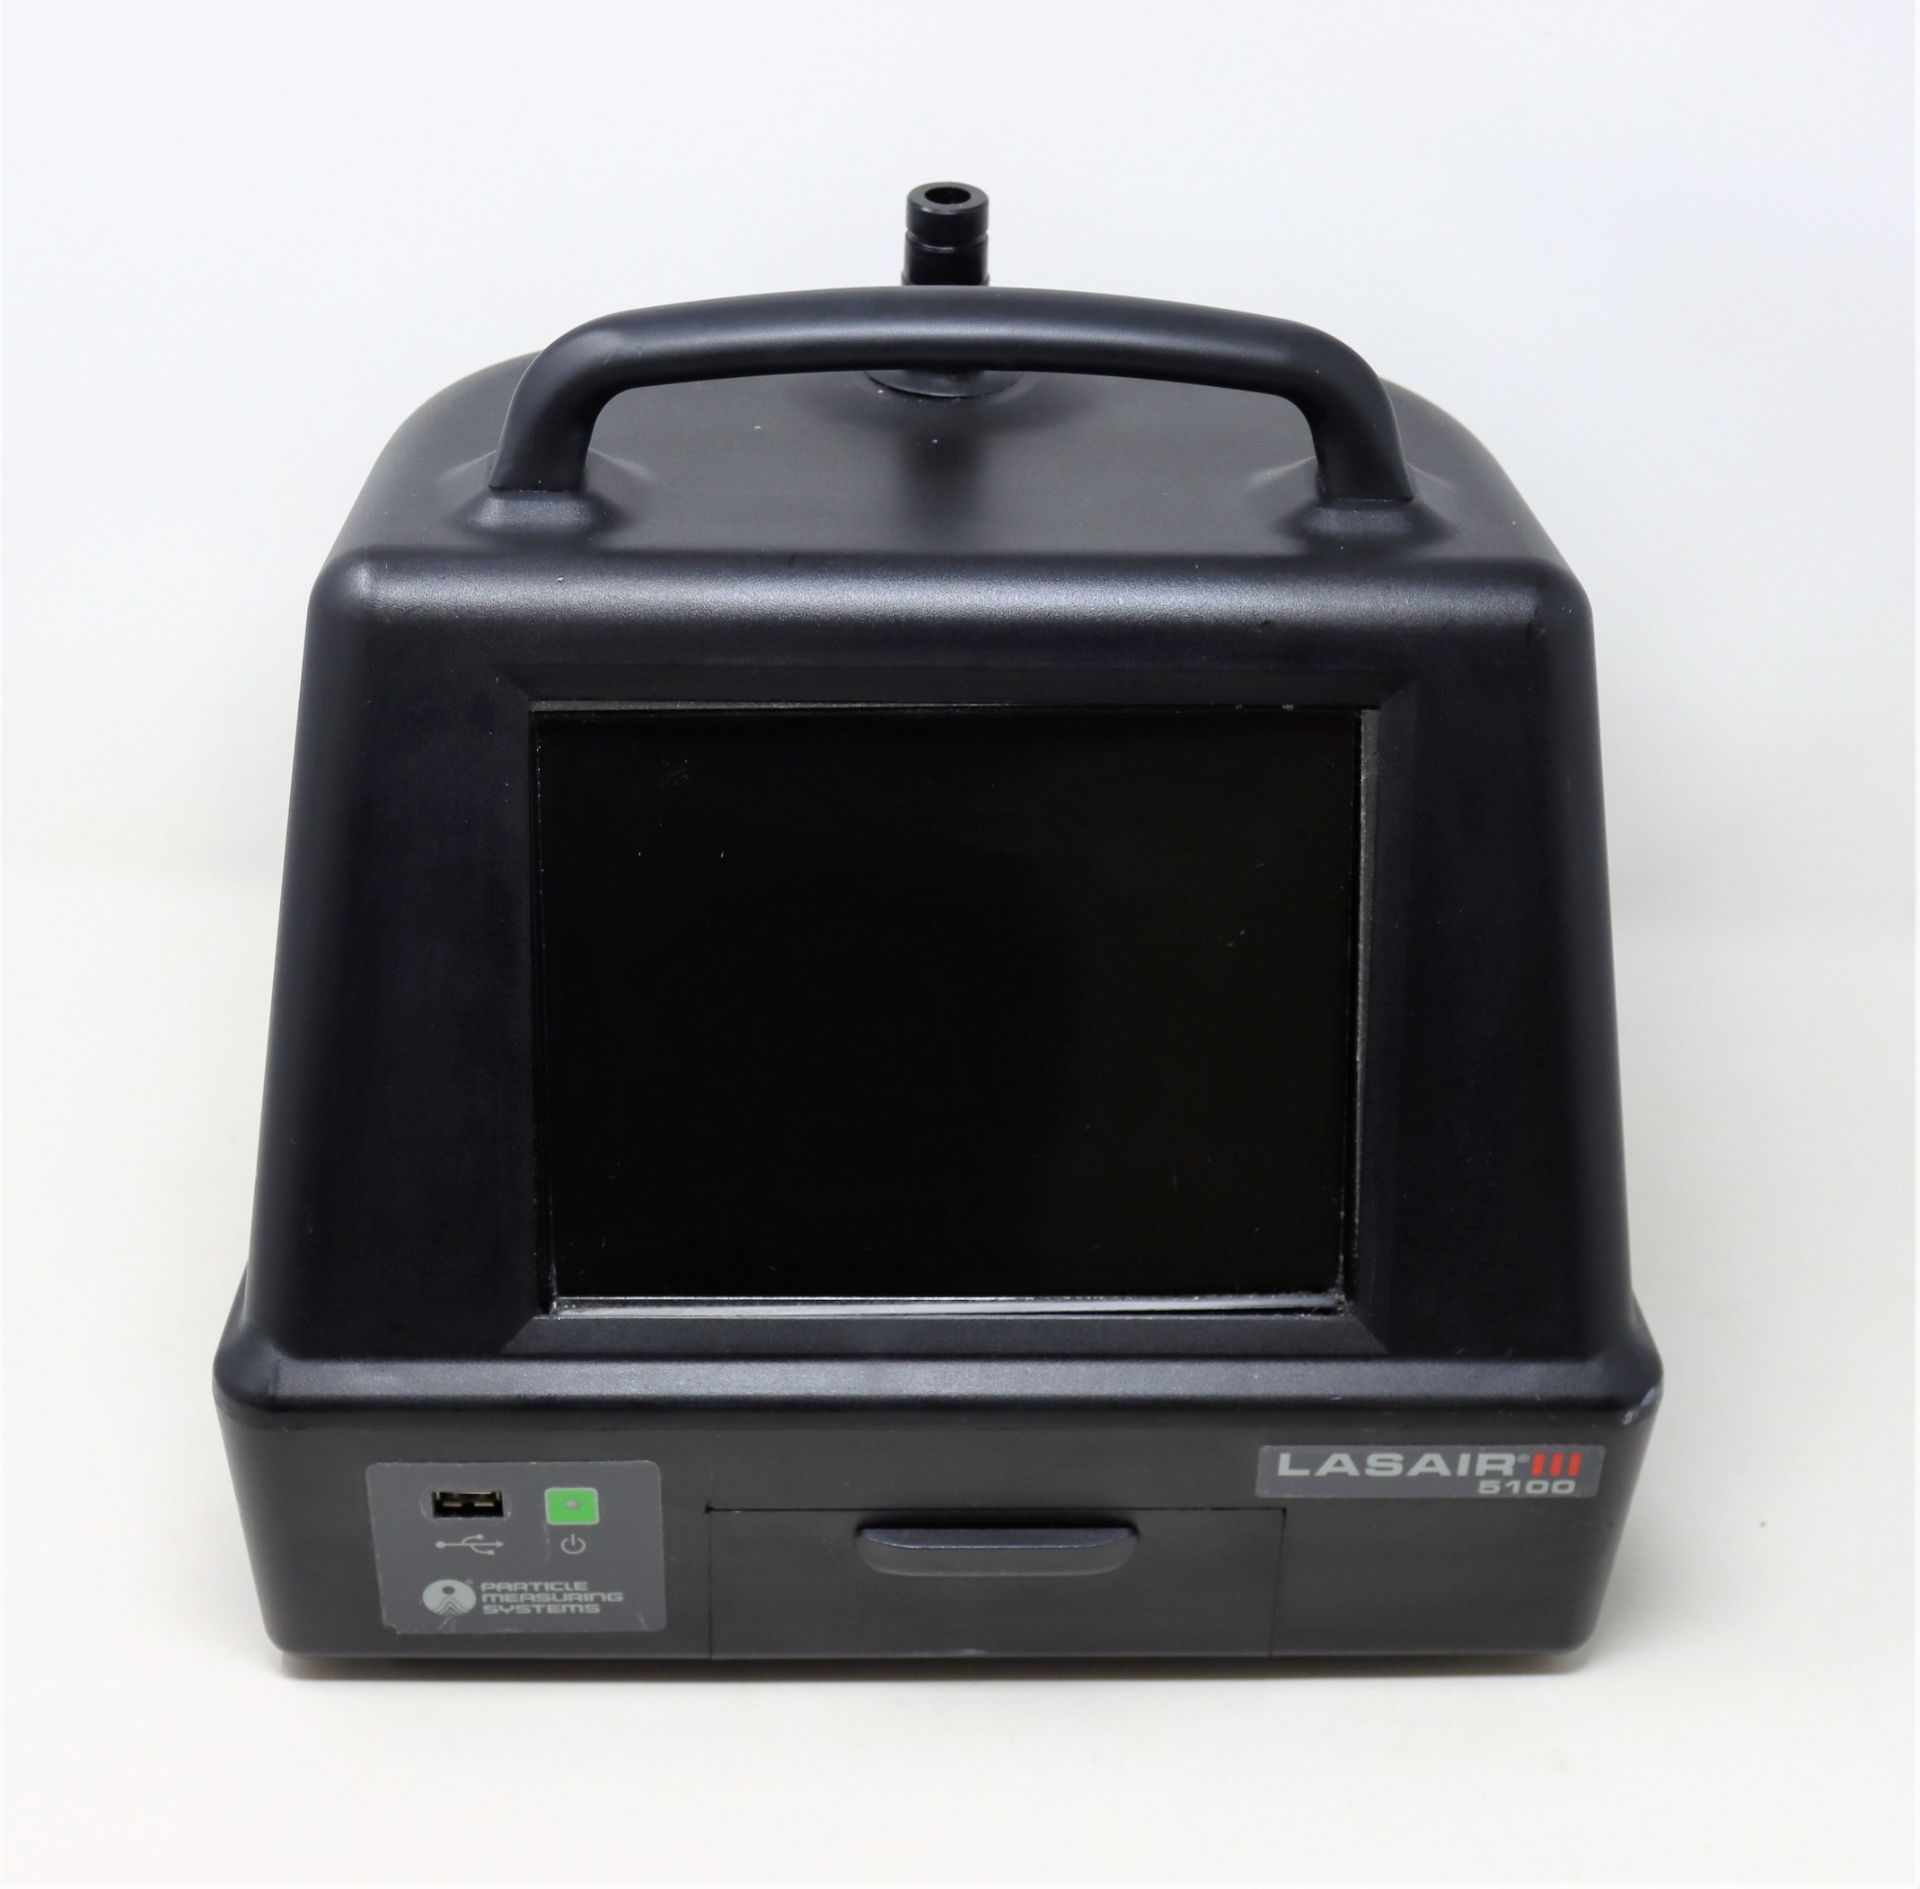 SOLD AS SEEN: A pre-owned PMS Lasair III 5100 Aerosol Particle Counter (No power supply or